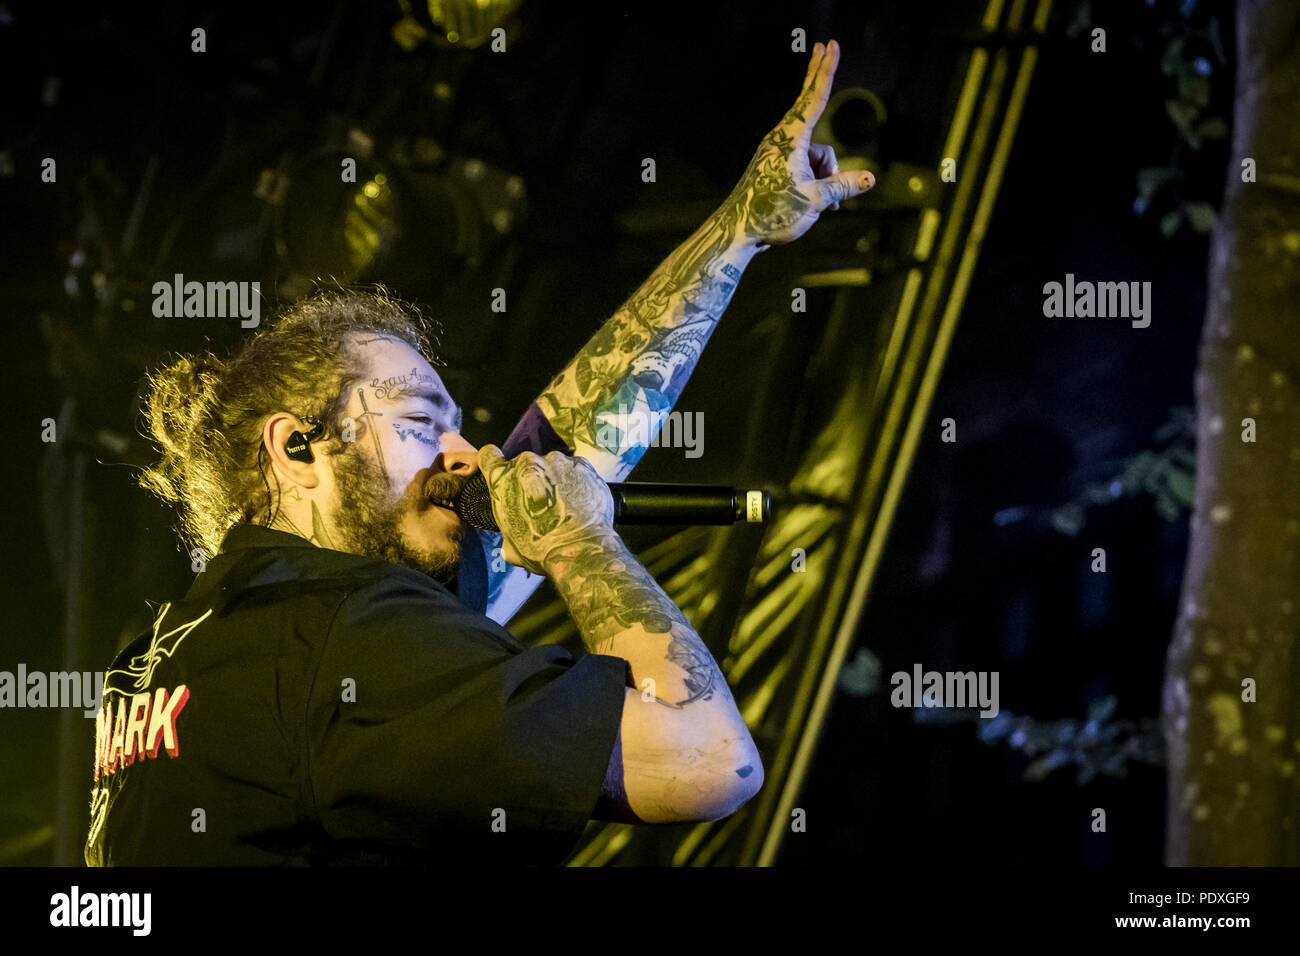 Denmark, Skanderborg - August 10, 2018. The American rapper and lyricist  Post Malone performs a live concert during the Danish music festival  SmukFest 2018. (Photo credit: Gonzales Photo - Kim M. Leland).